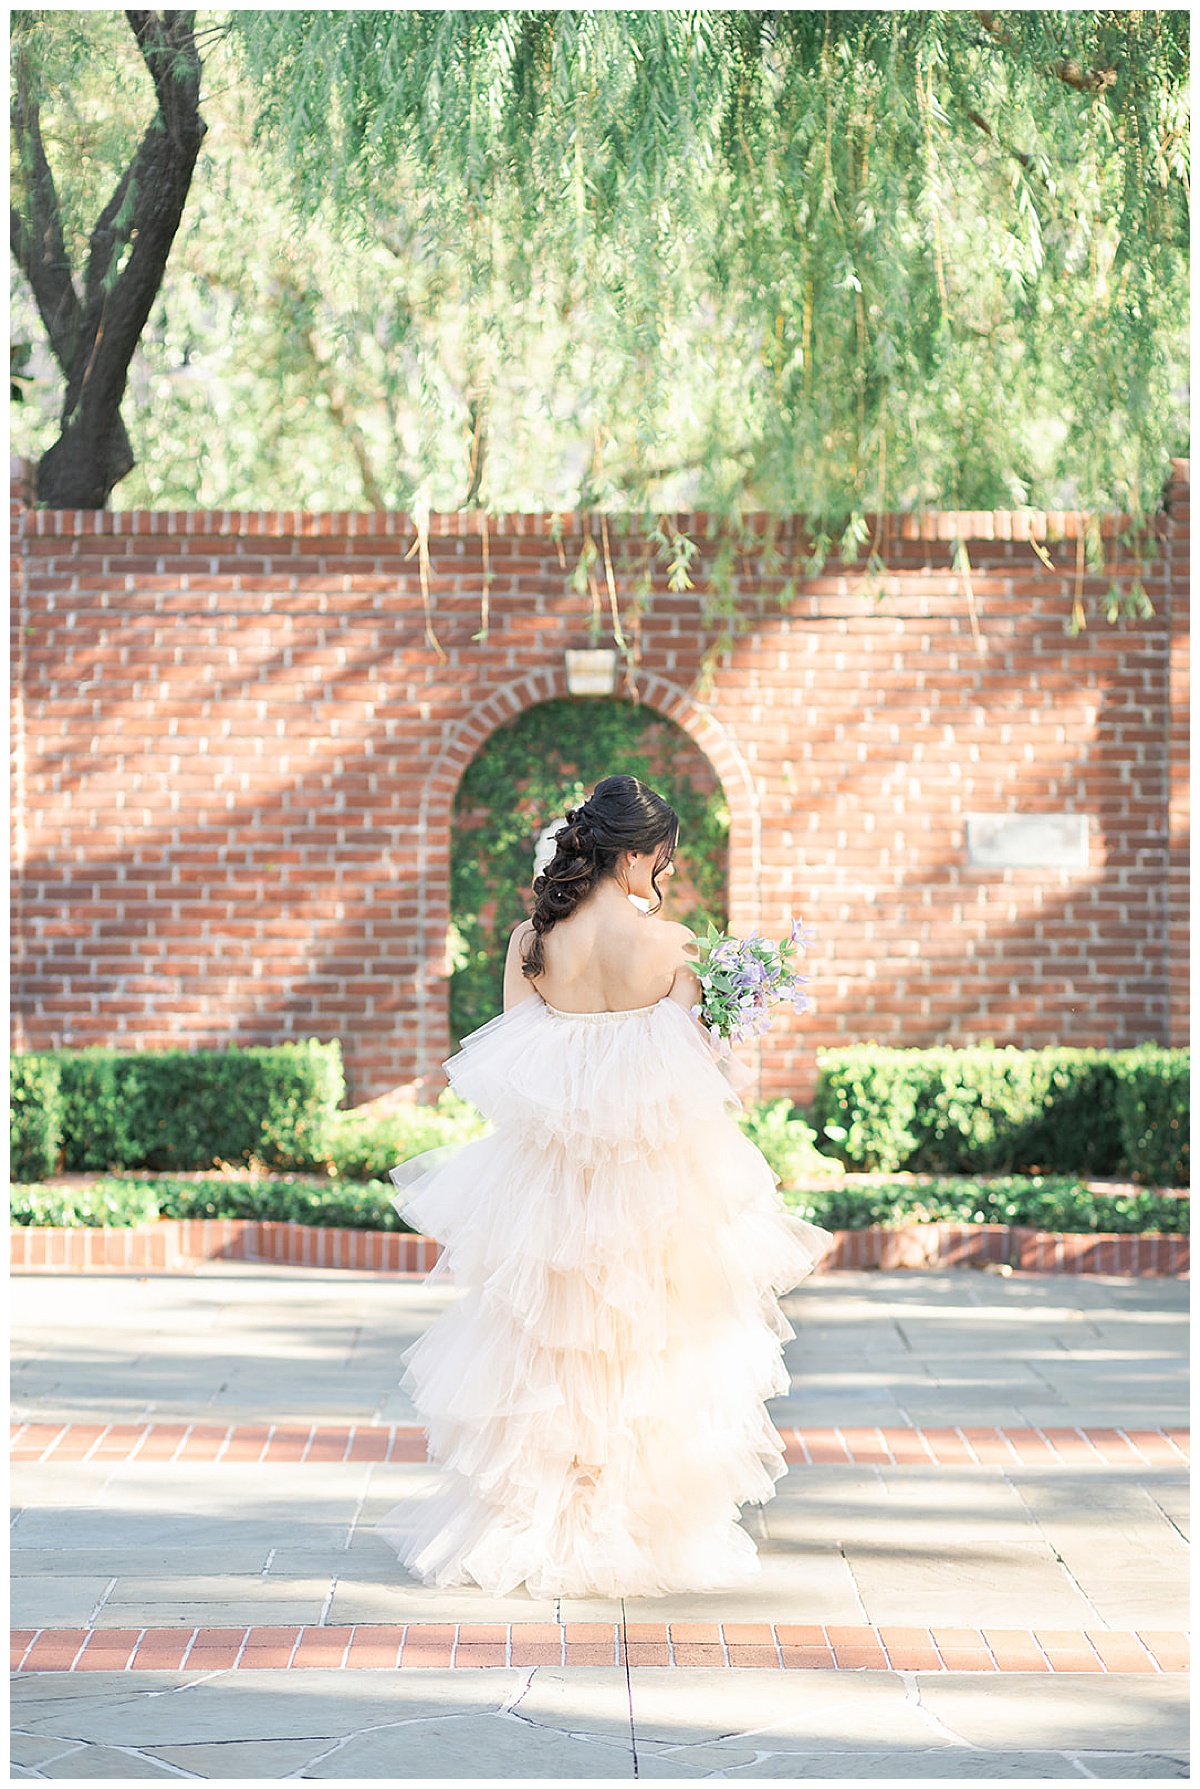 Stunning bridal gown for River Oaks Editorial